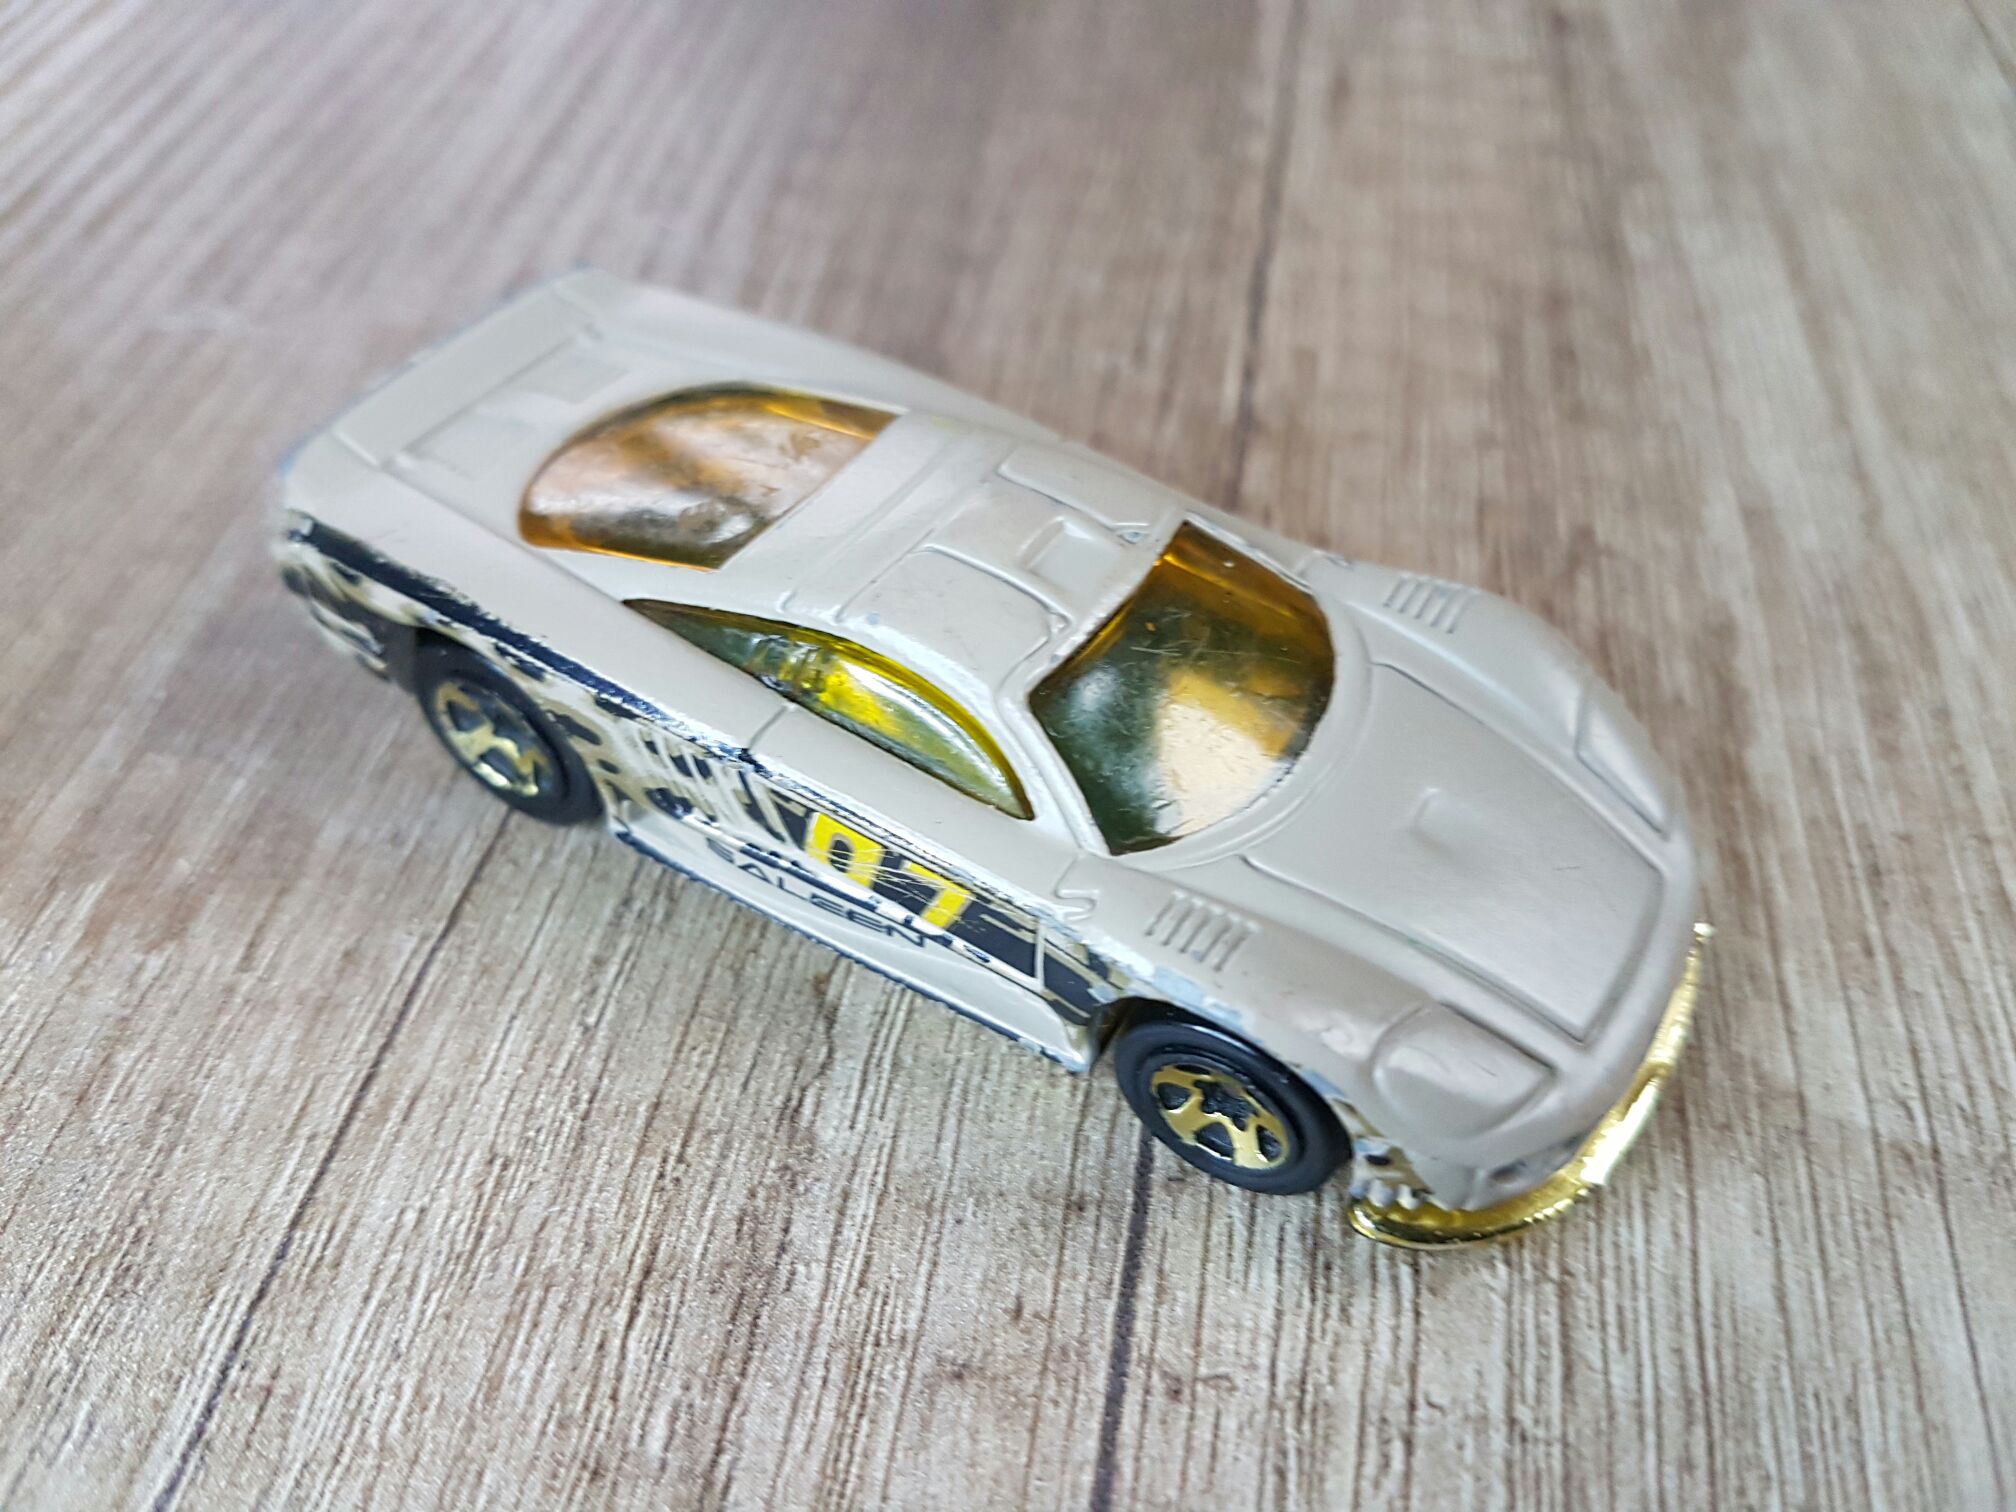 Saleen S7 - Camouflage toy car collectible - Main Image 1